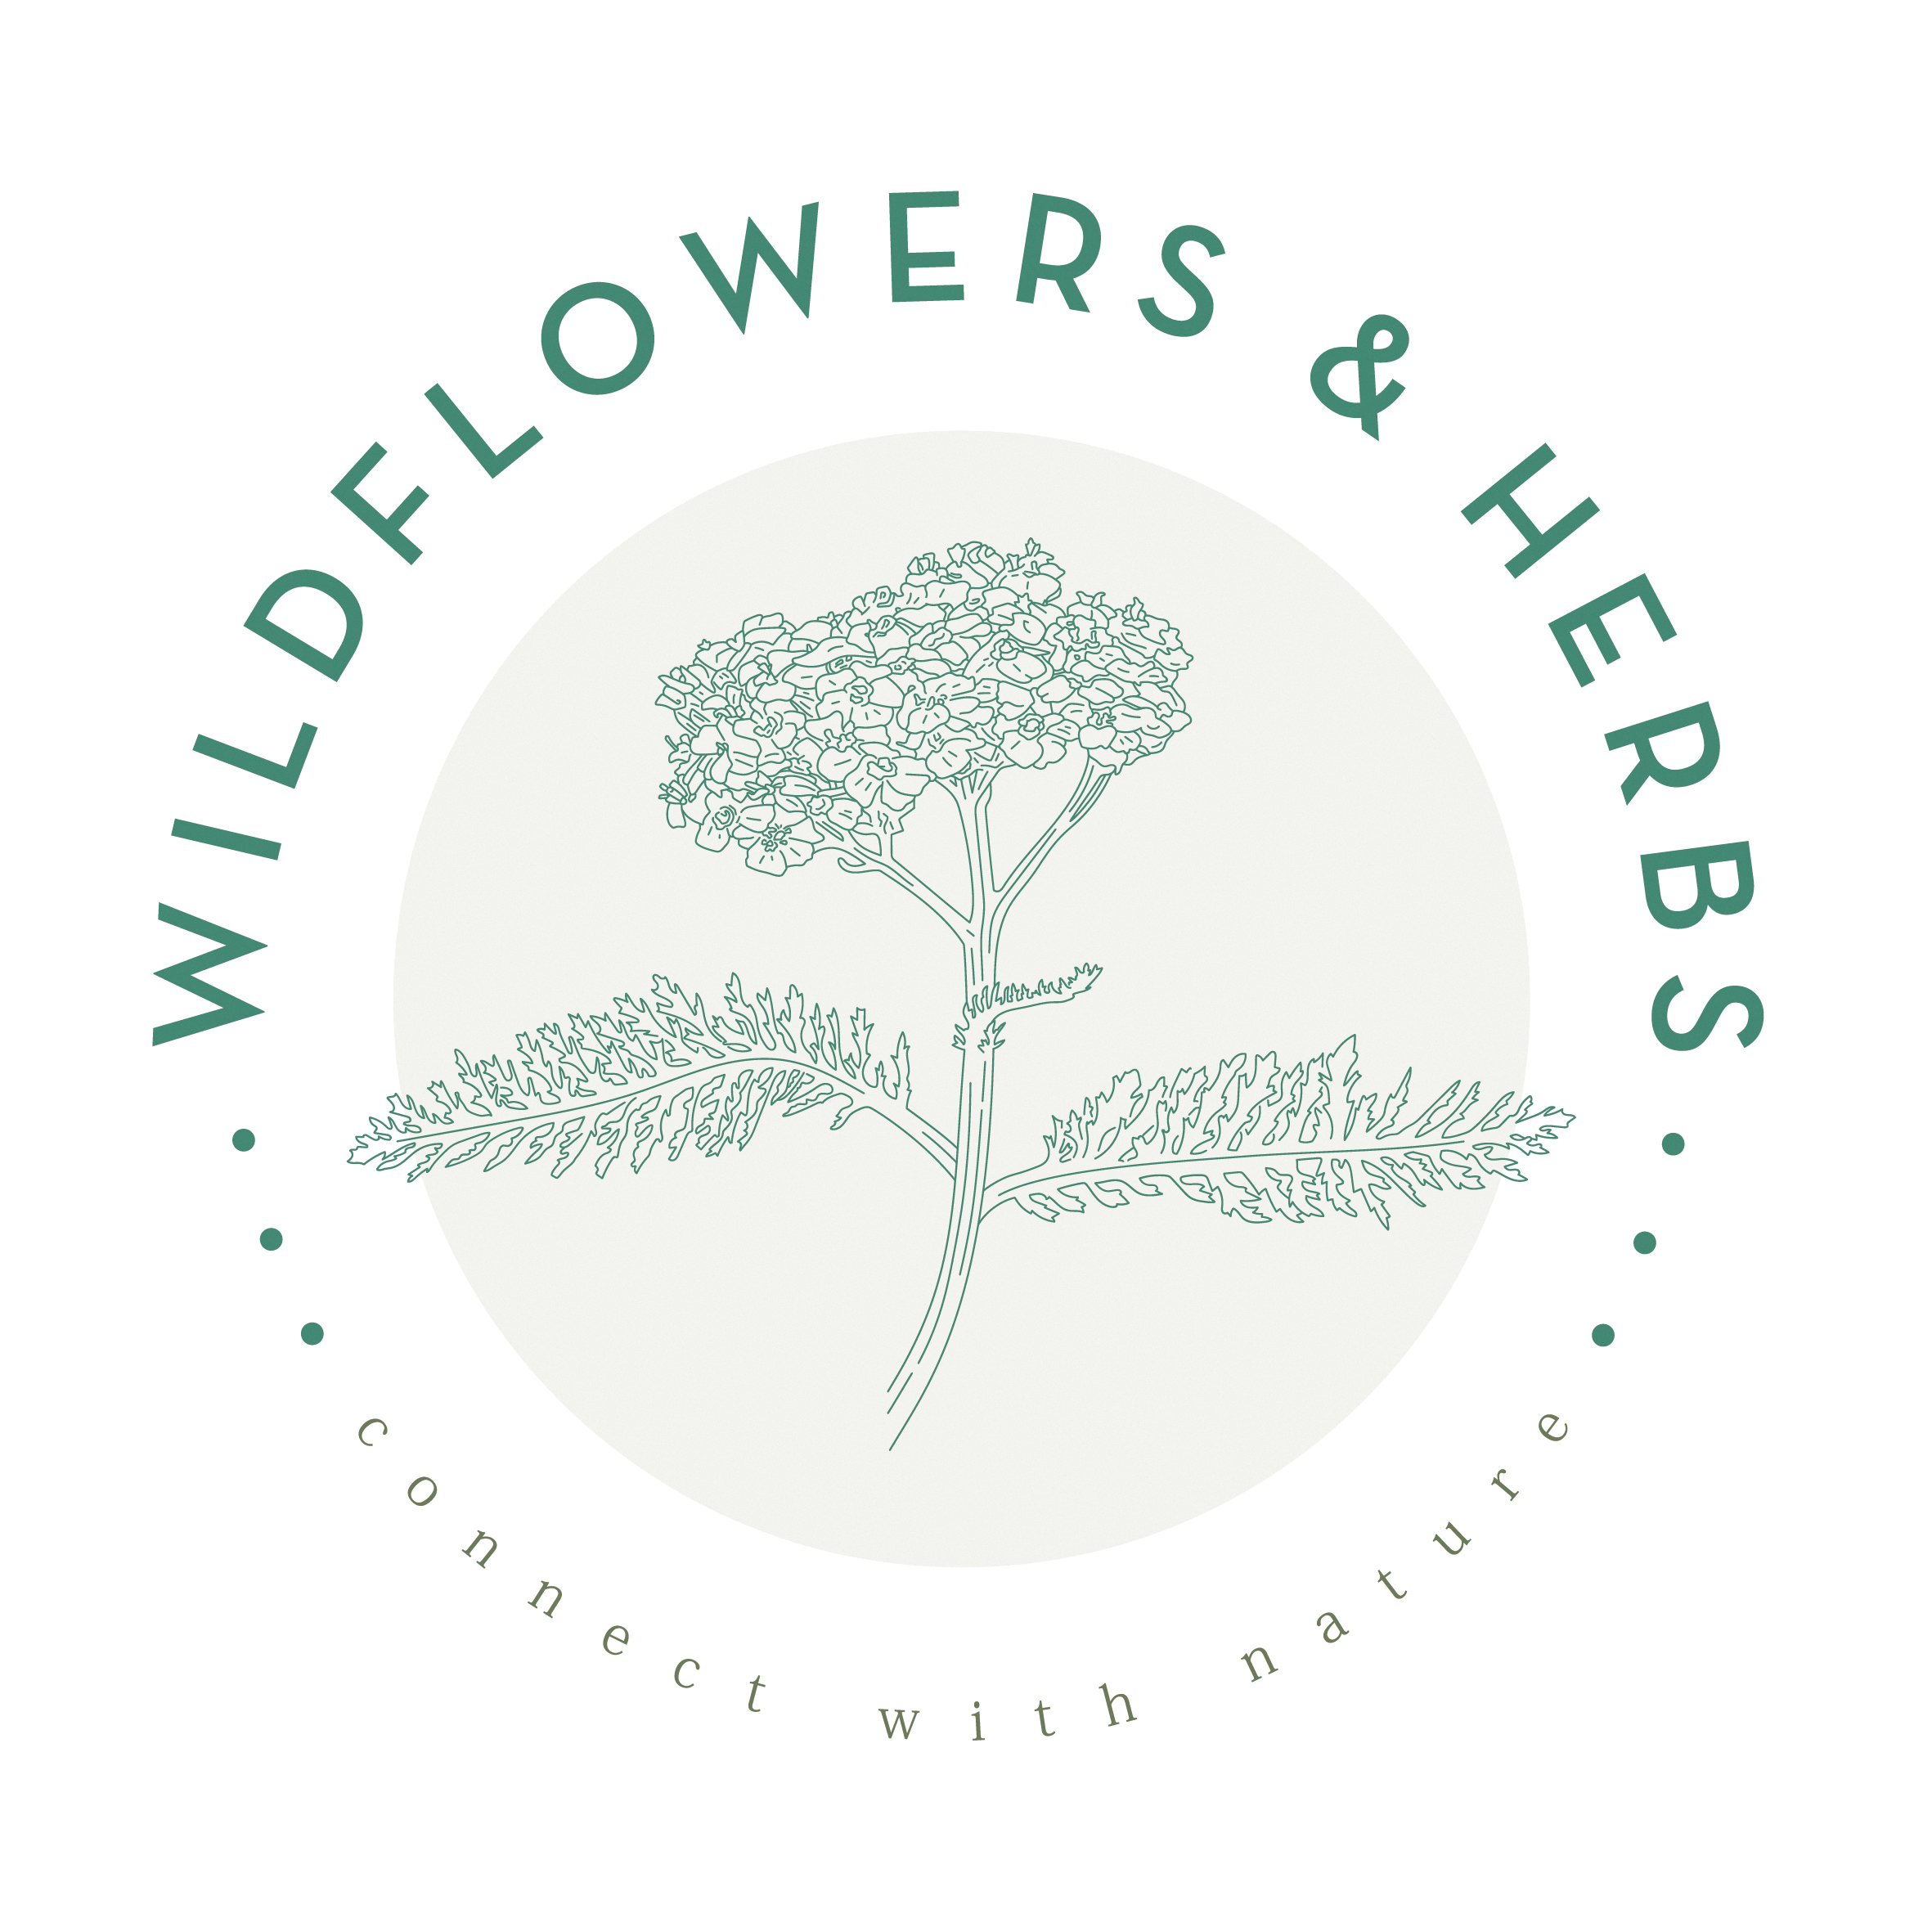 Wildflowers and herbs